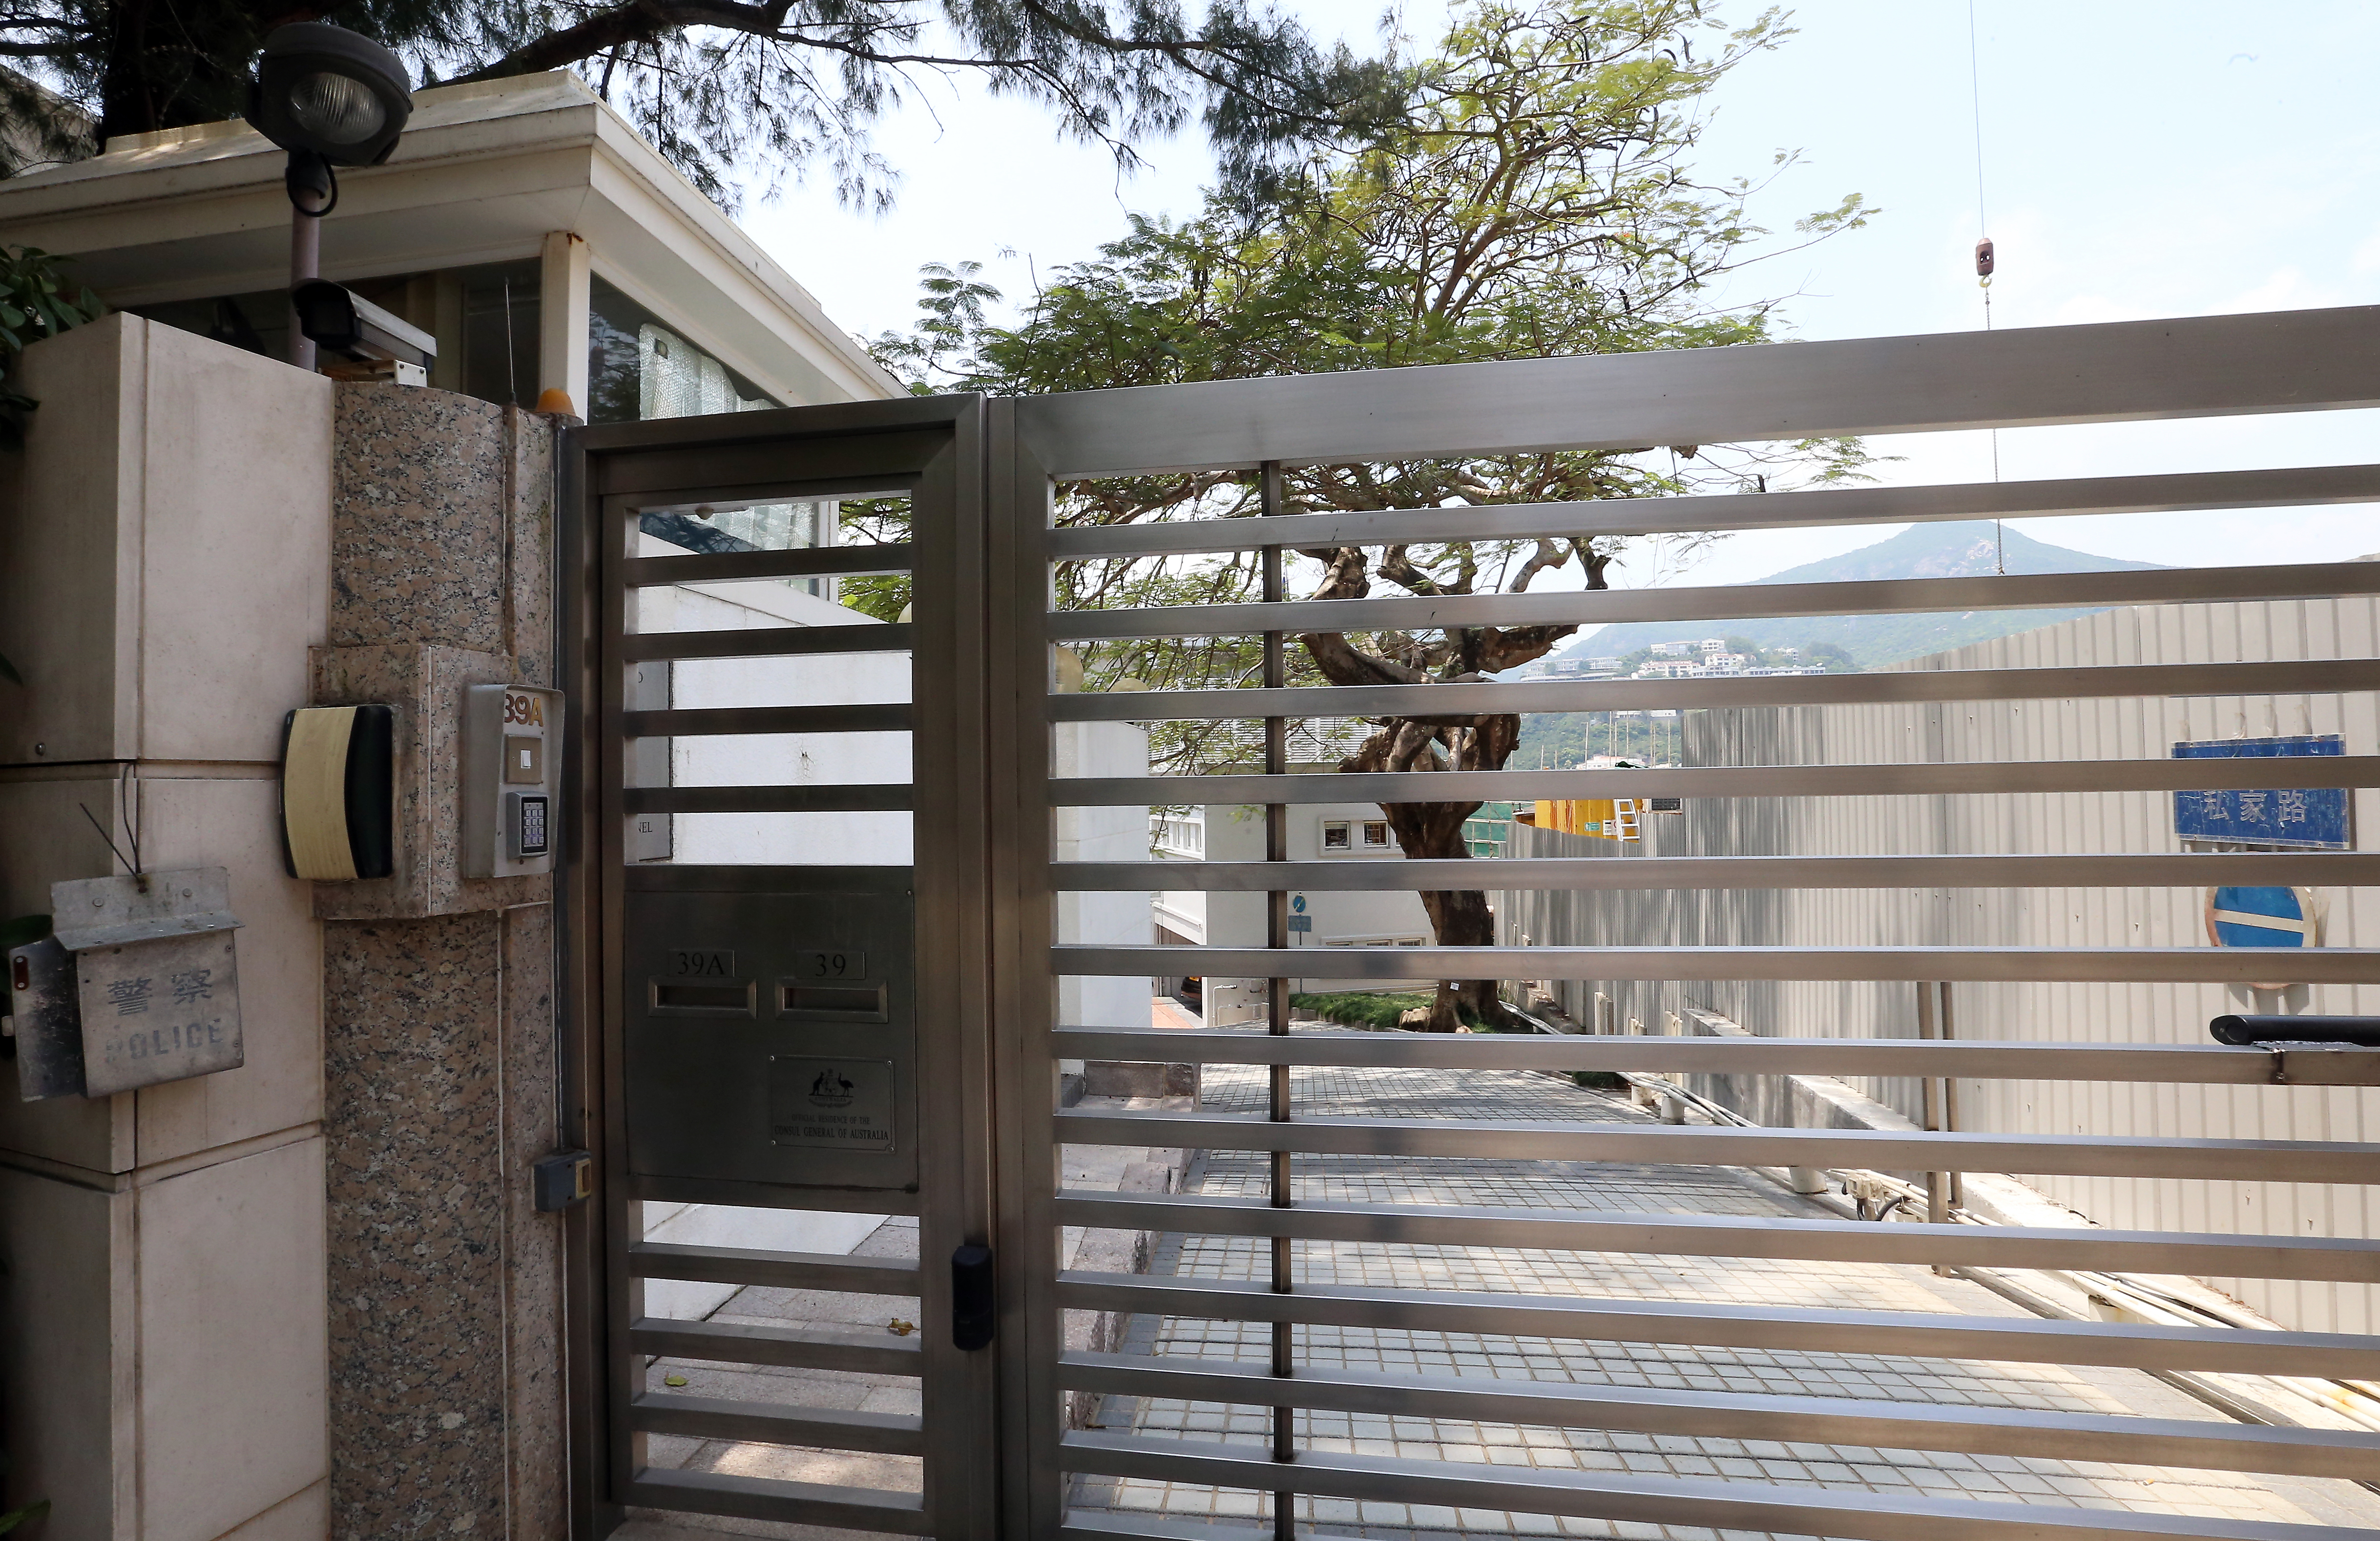 There have been a number of high-profile burglaries, including at the Australian consul general's residence in Deep Water Bay in April. Photo: K. Y. Cheng